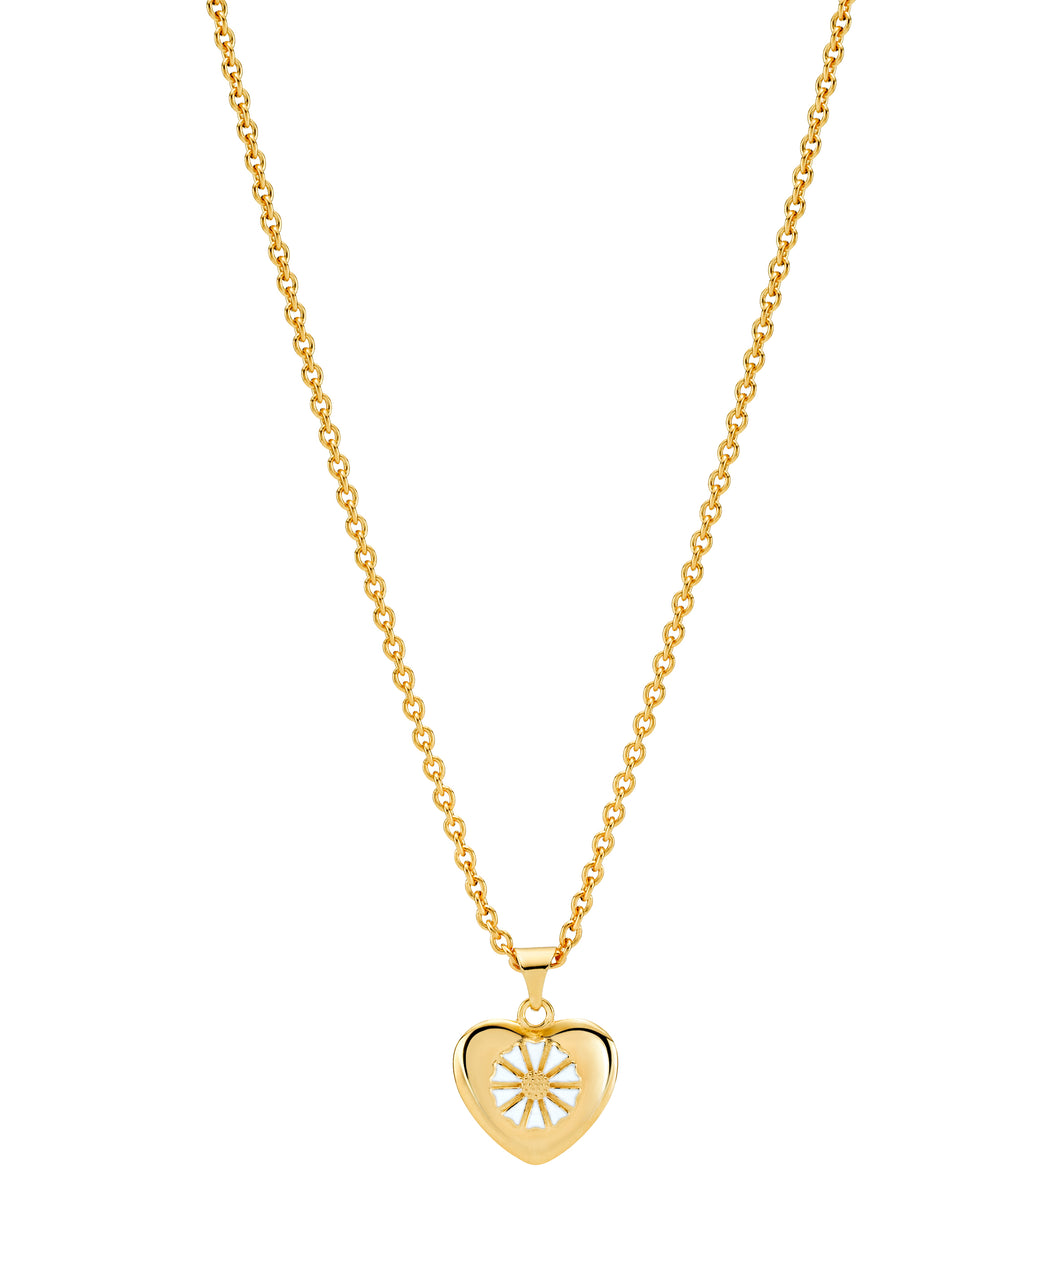 Marguerit Necklace 7.5mm with 14mm heart on anchor chain 45-48cm (925)